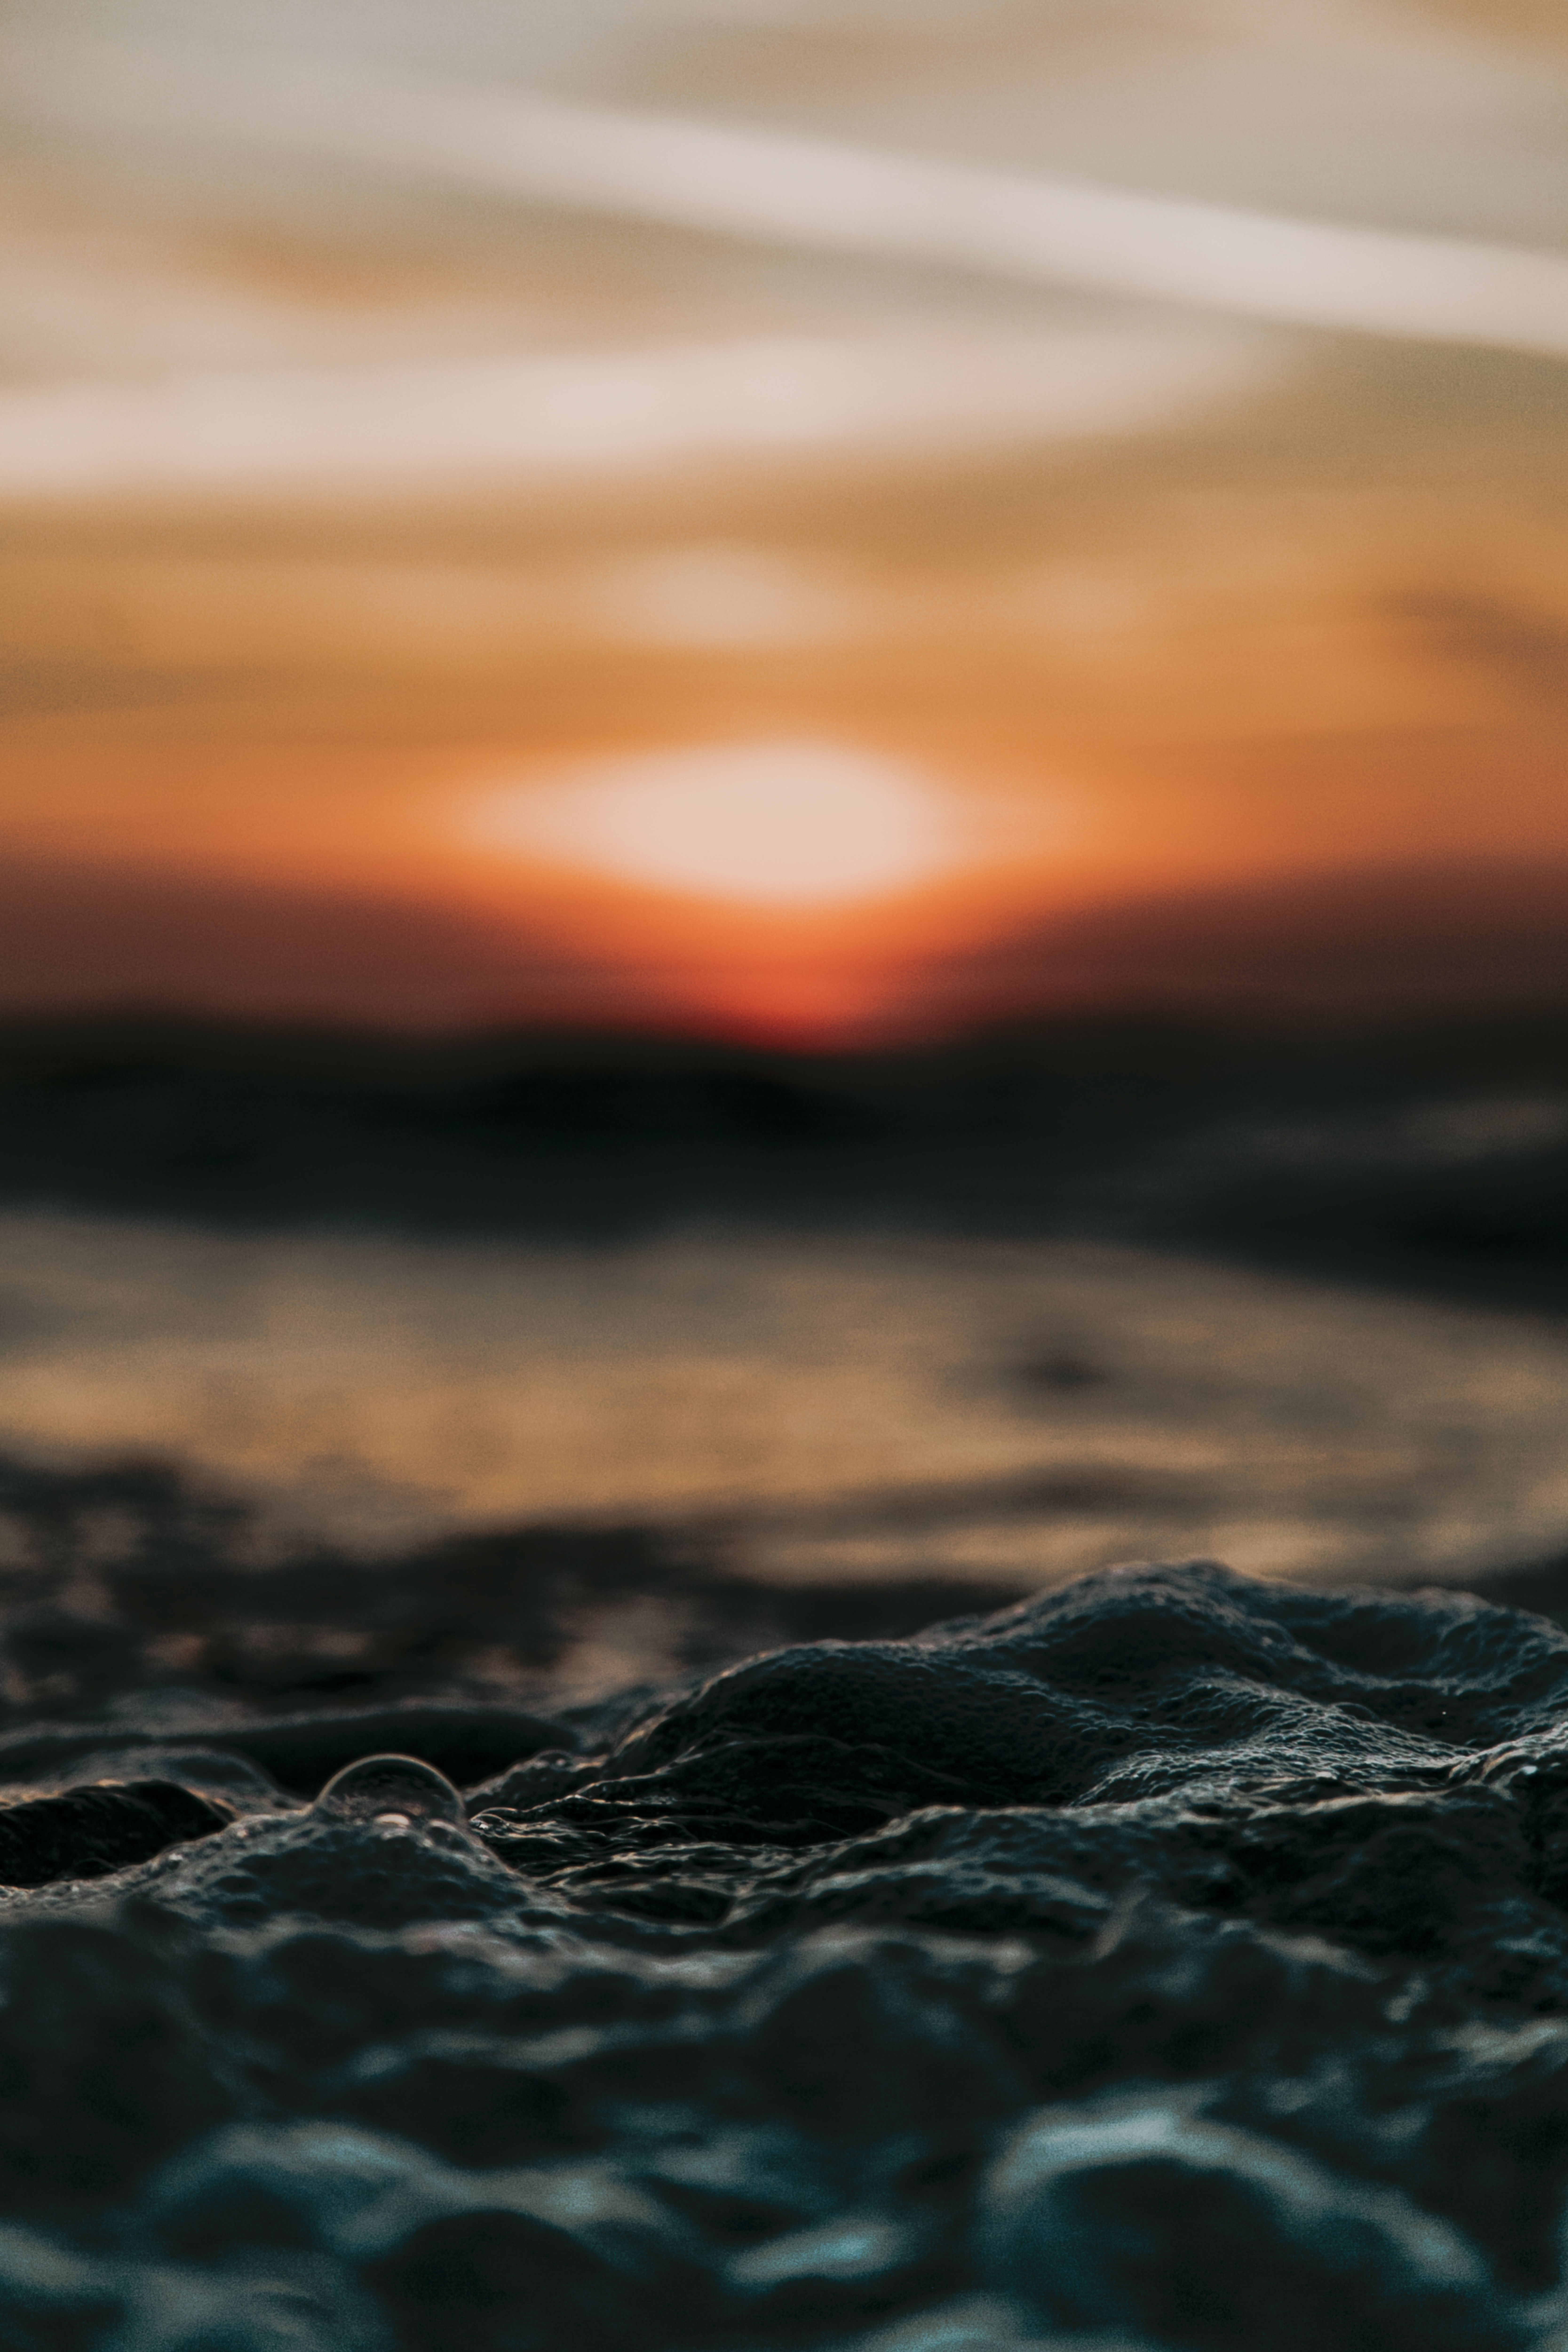 blurred, nature, water, sunset, waves, fuzzy